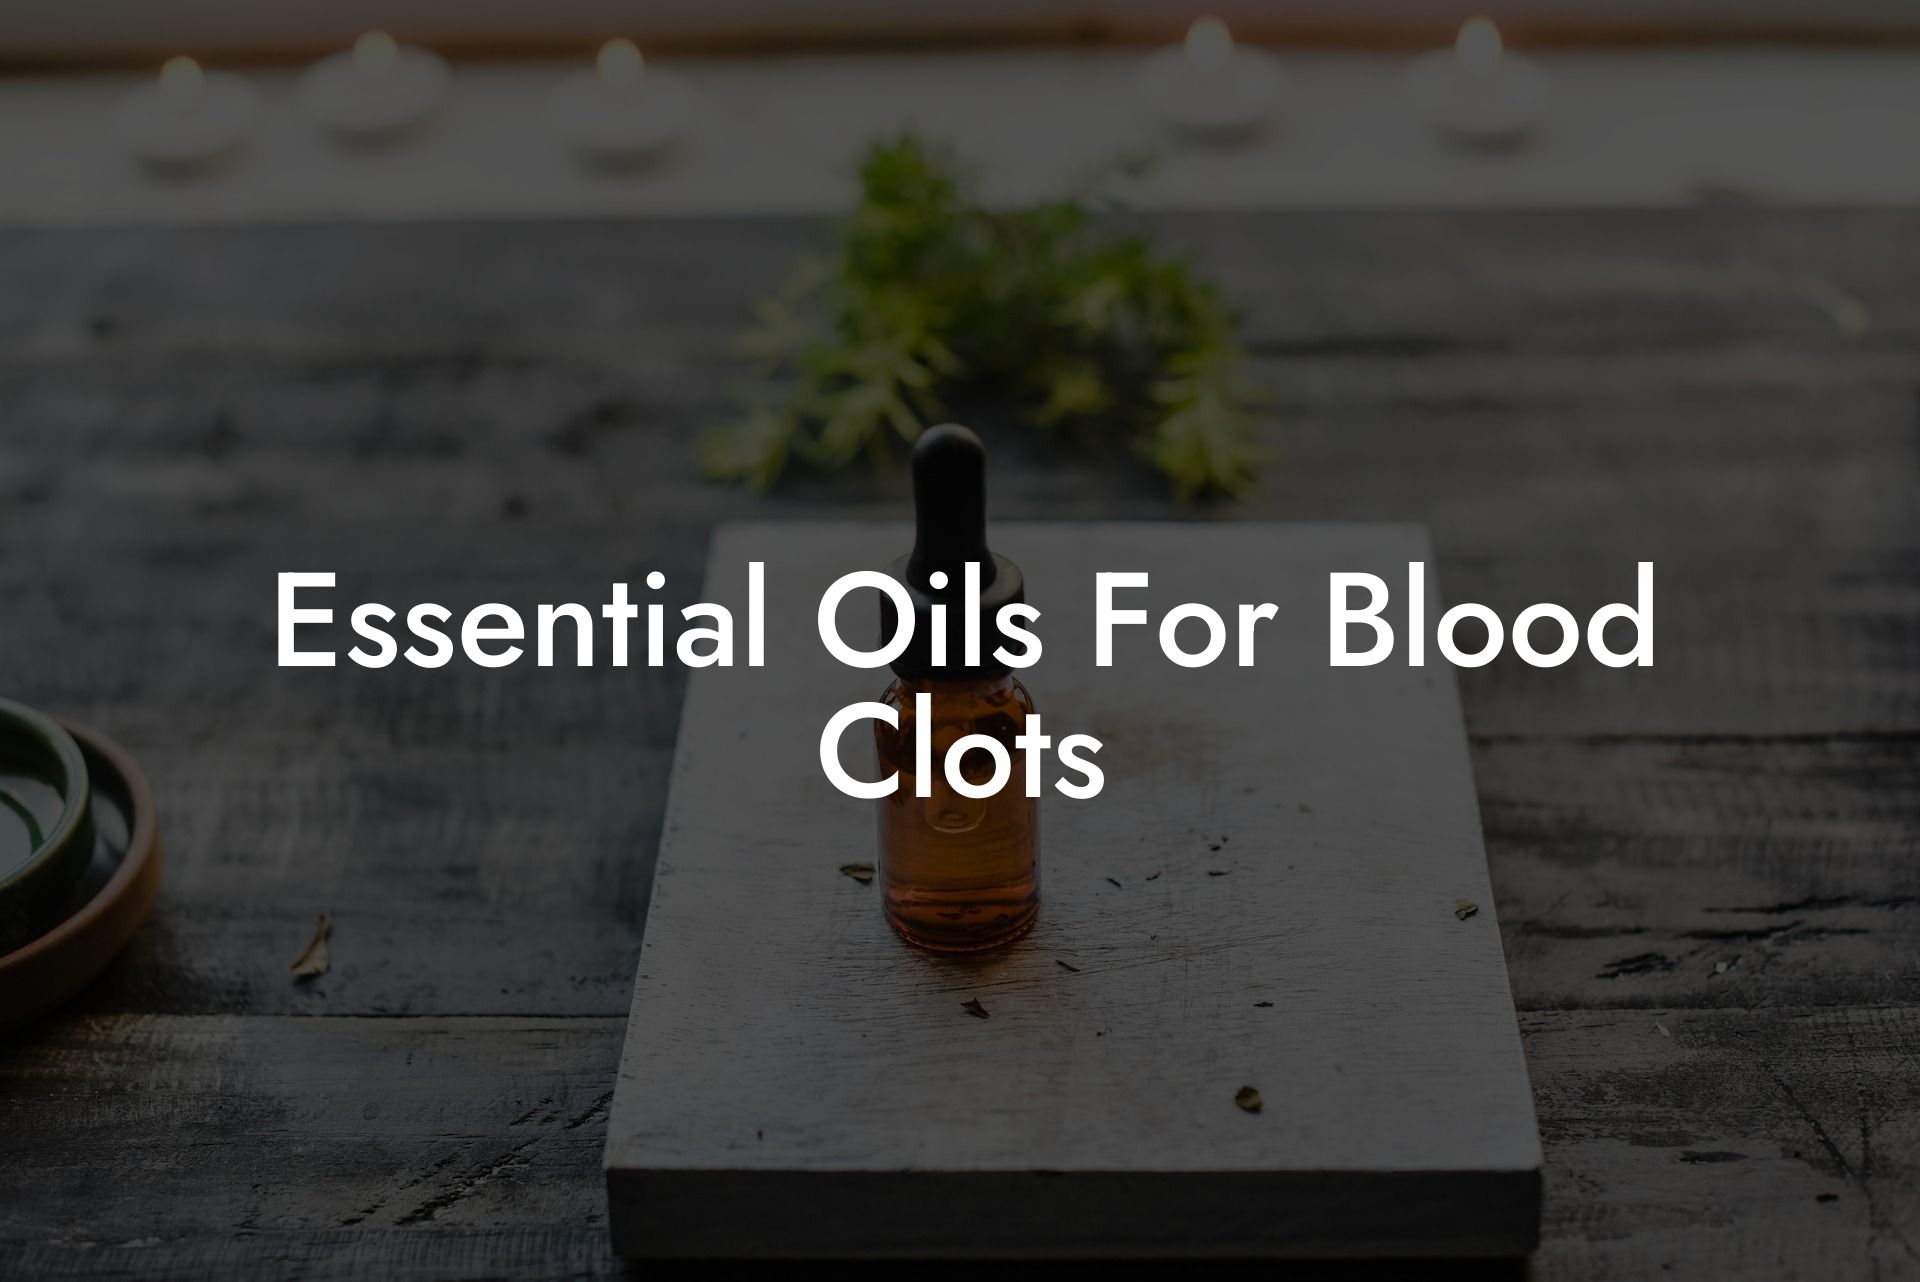 Essential Oils For Blood Clots